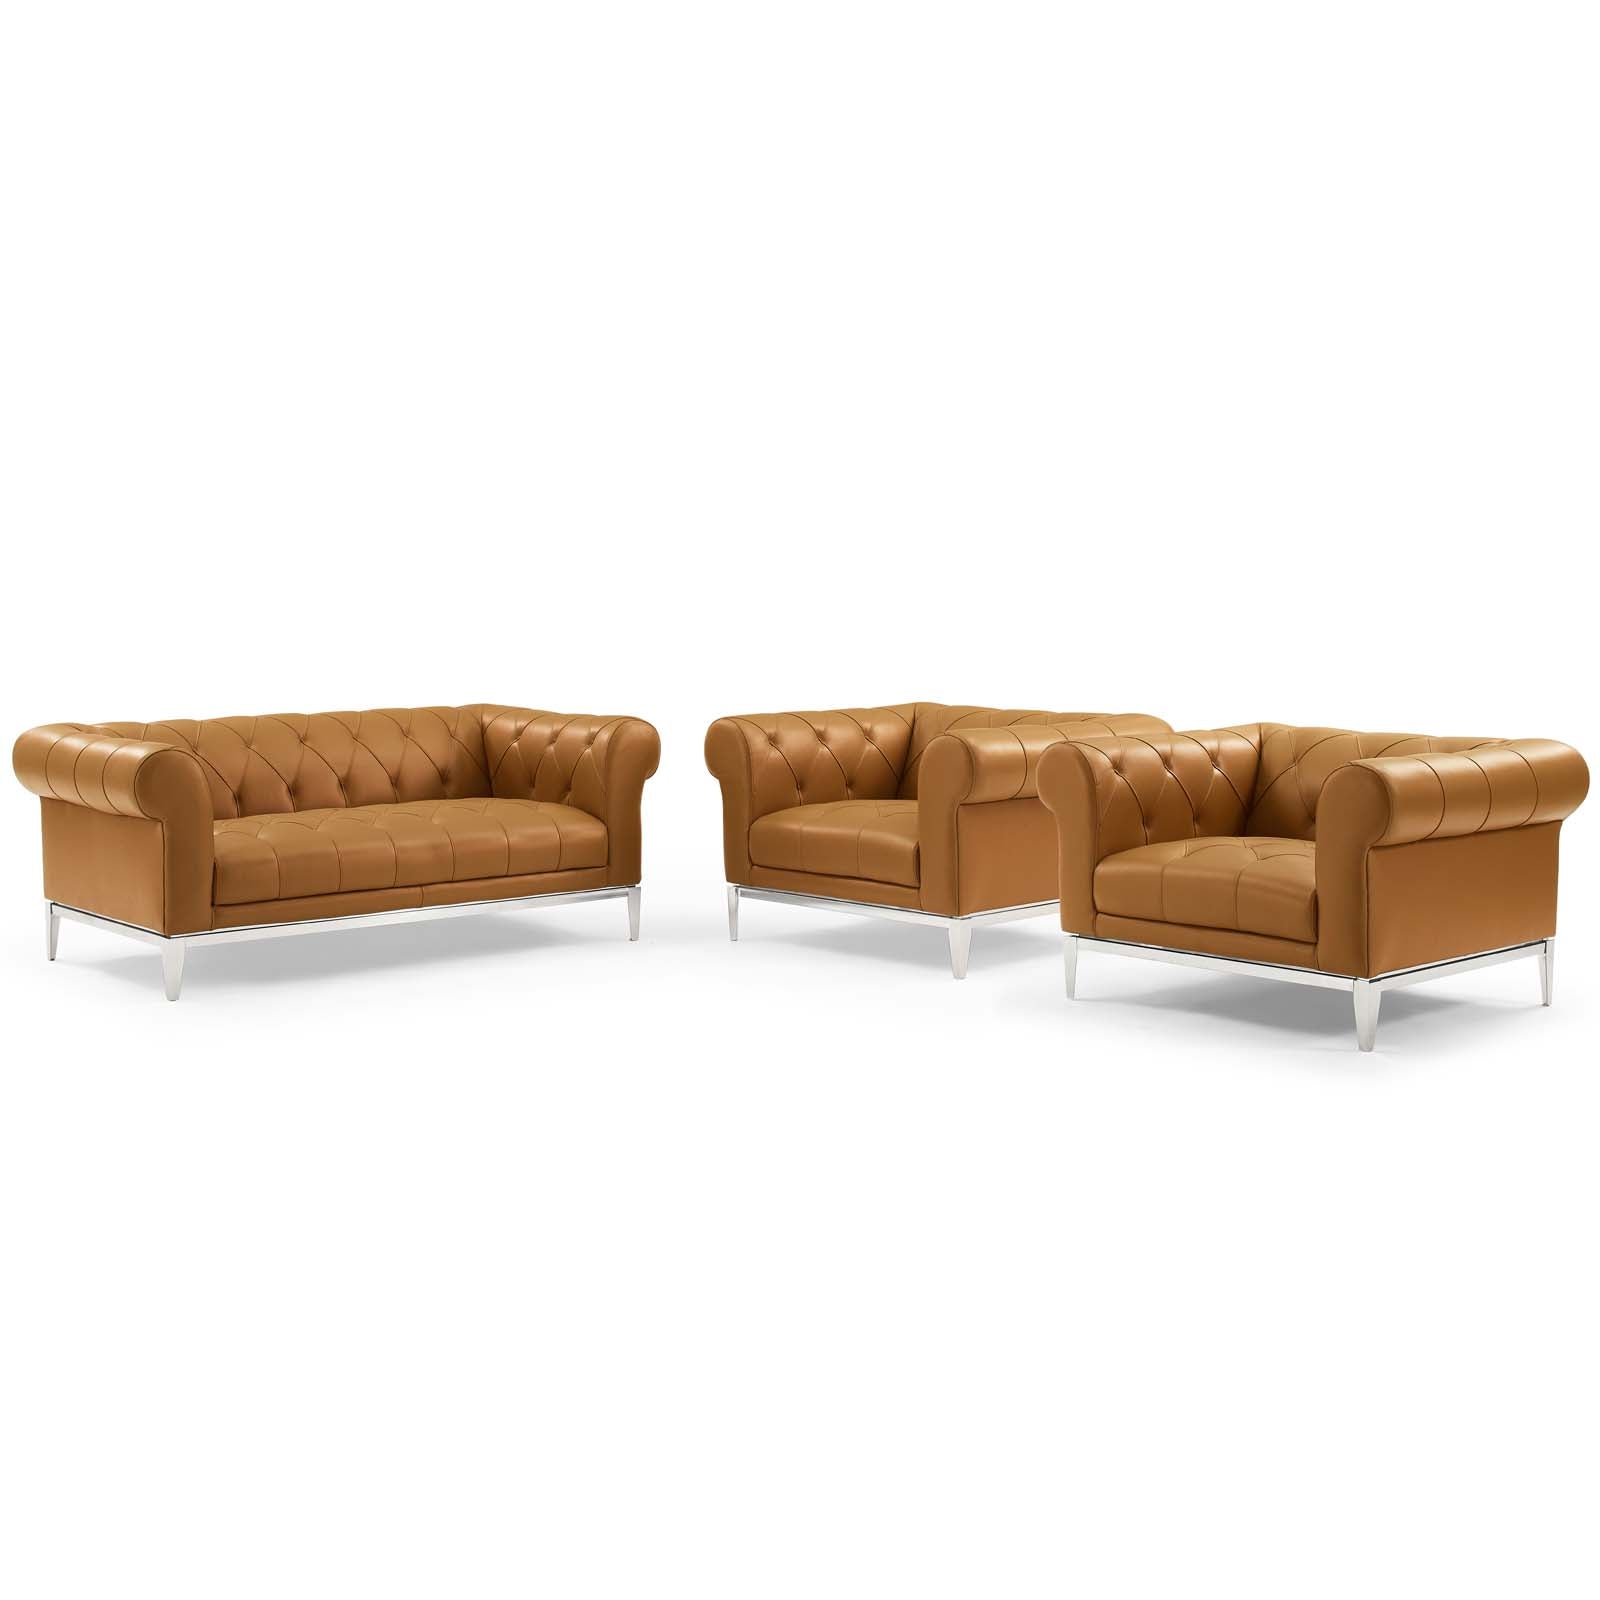 Modway Living Room Sets - Idyll-Tufted-Upholstered-Leather-3-Piece-Set-Tan